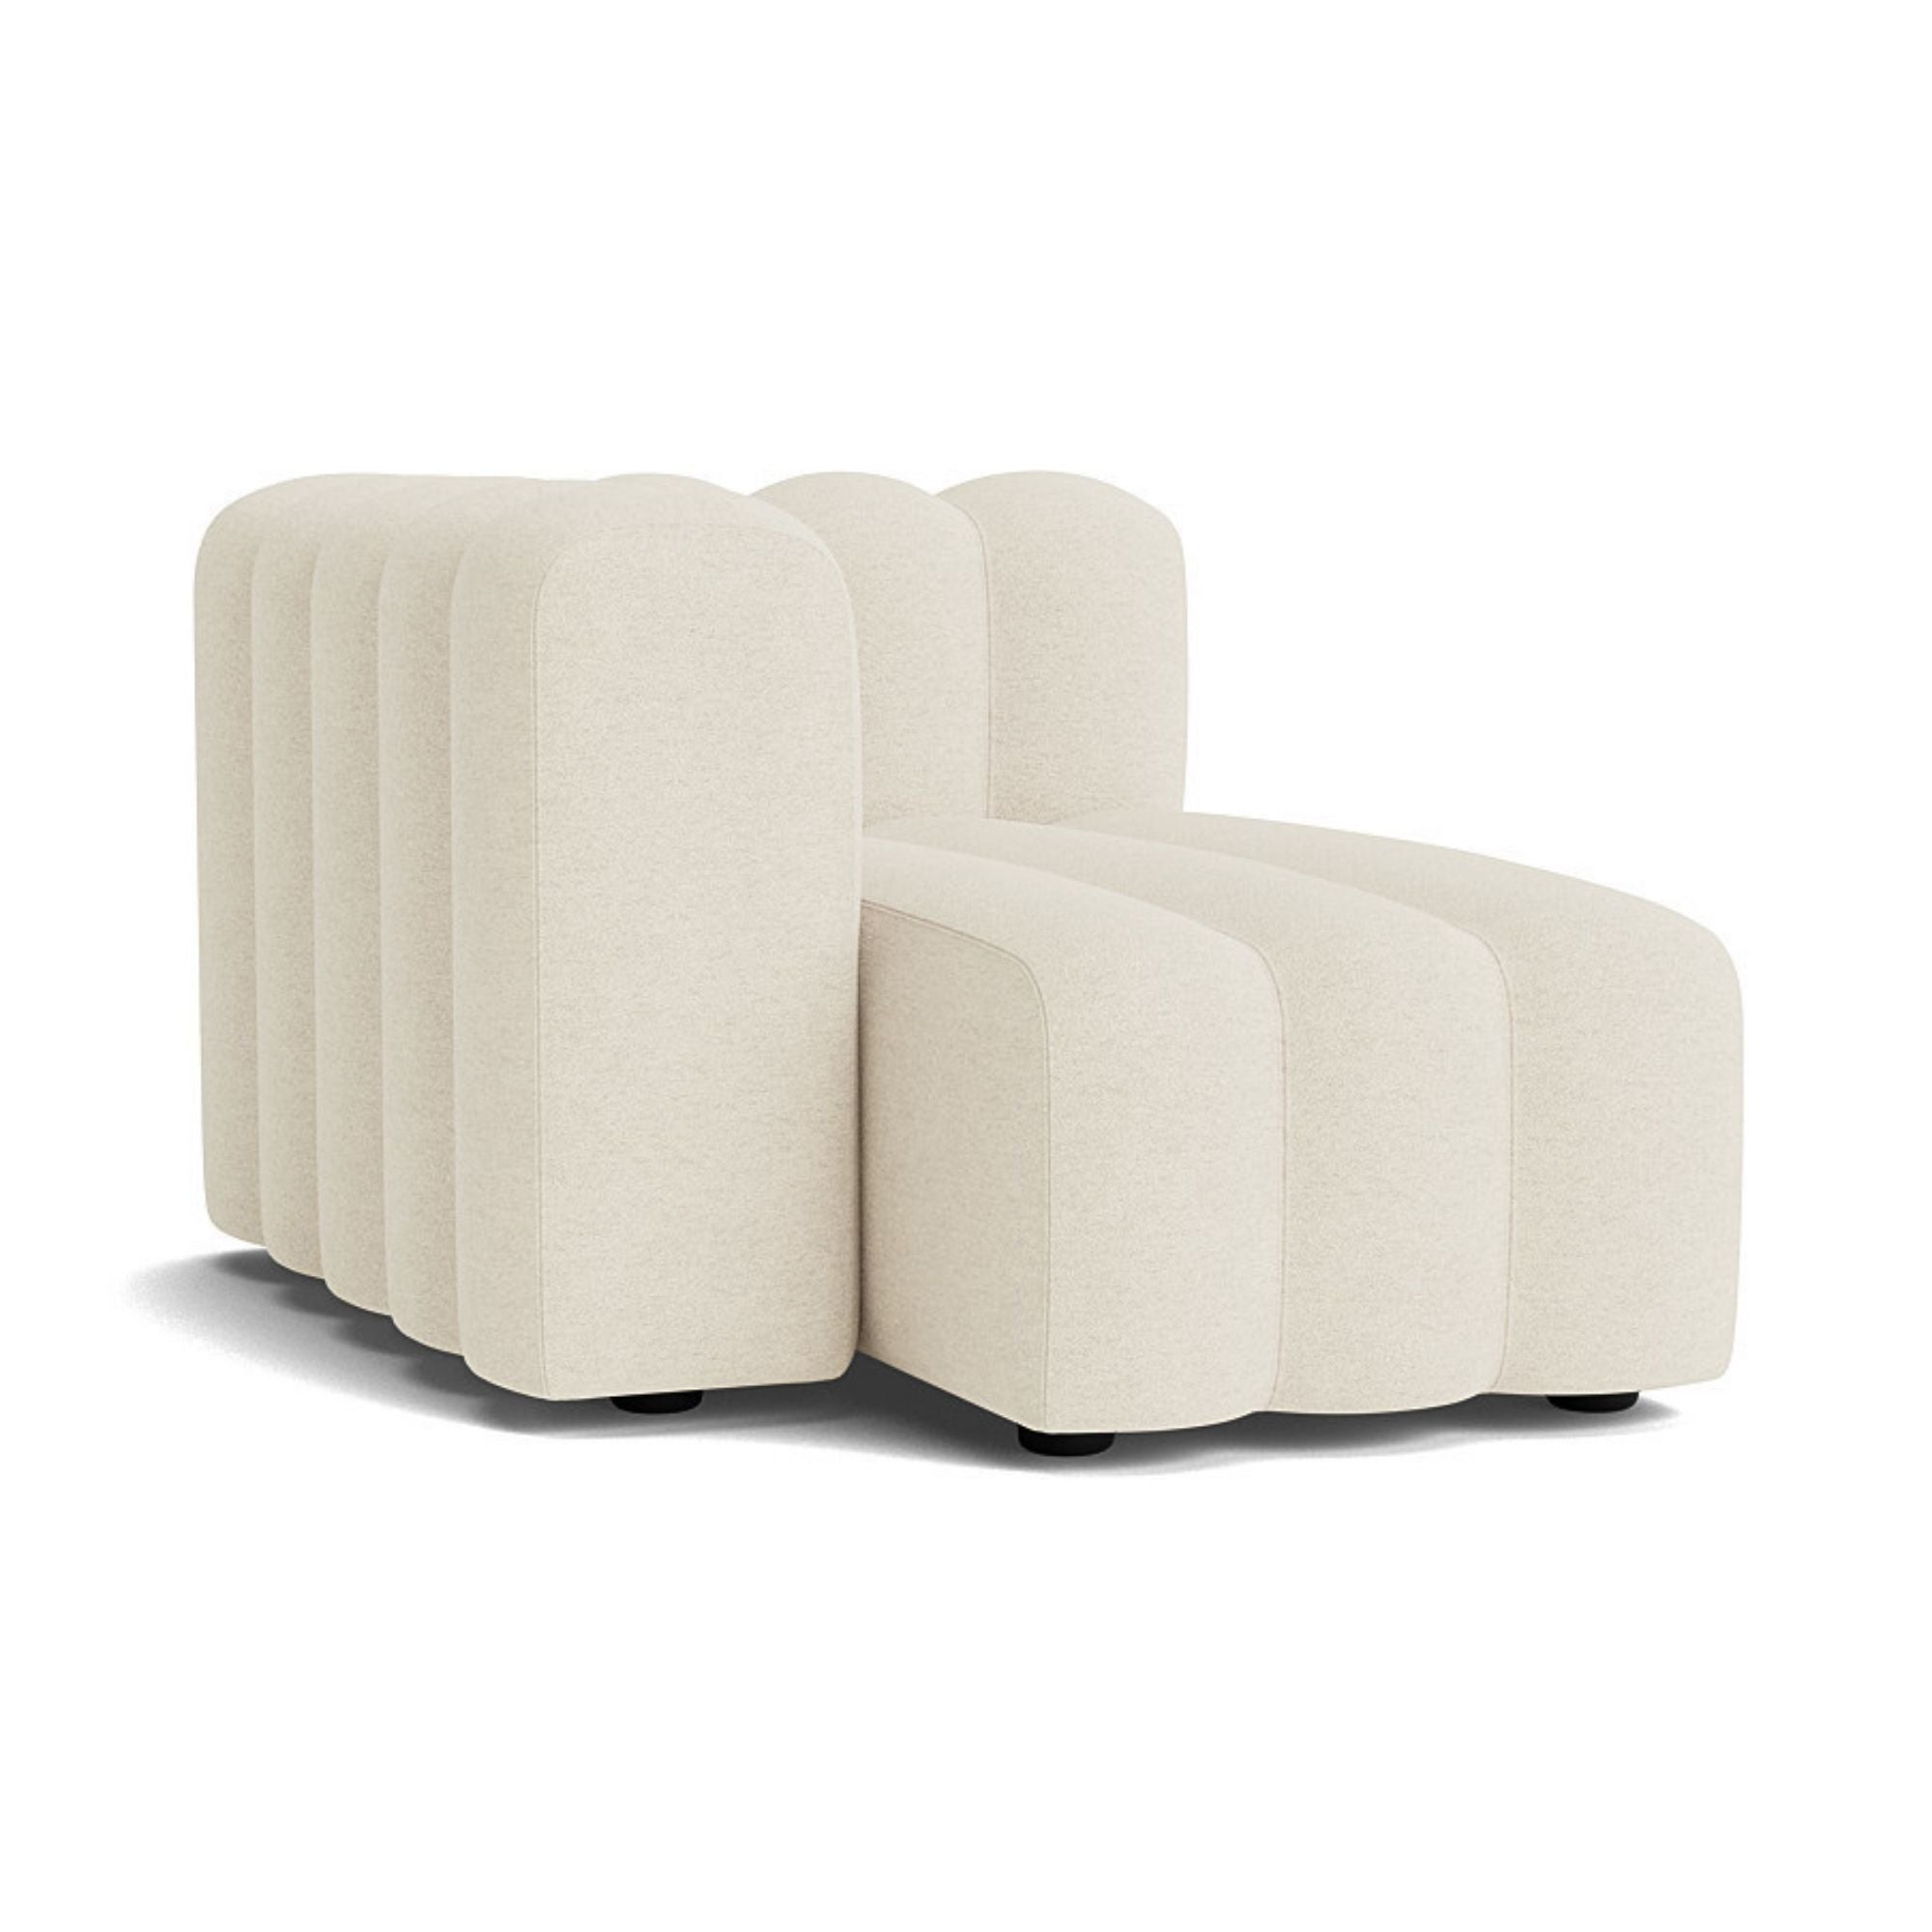 Studio Lounge Small Armrest - THAT COOL LIVING